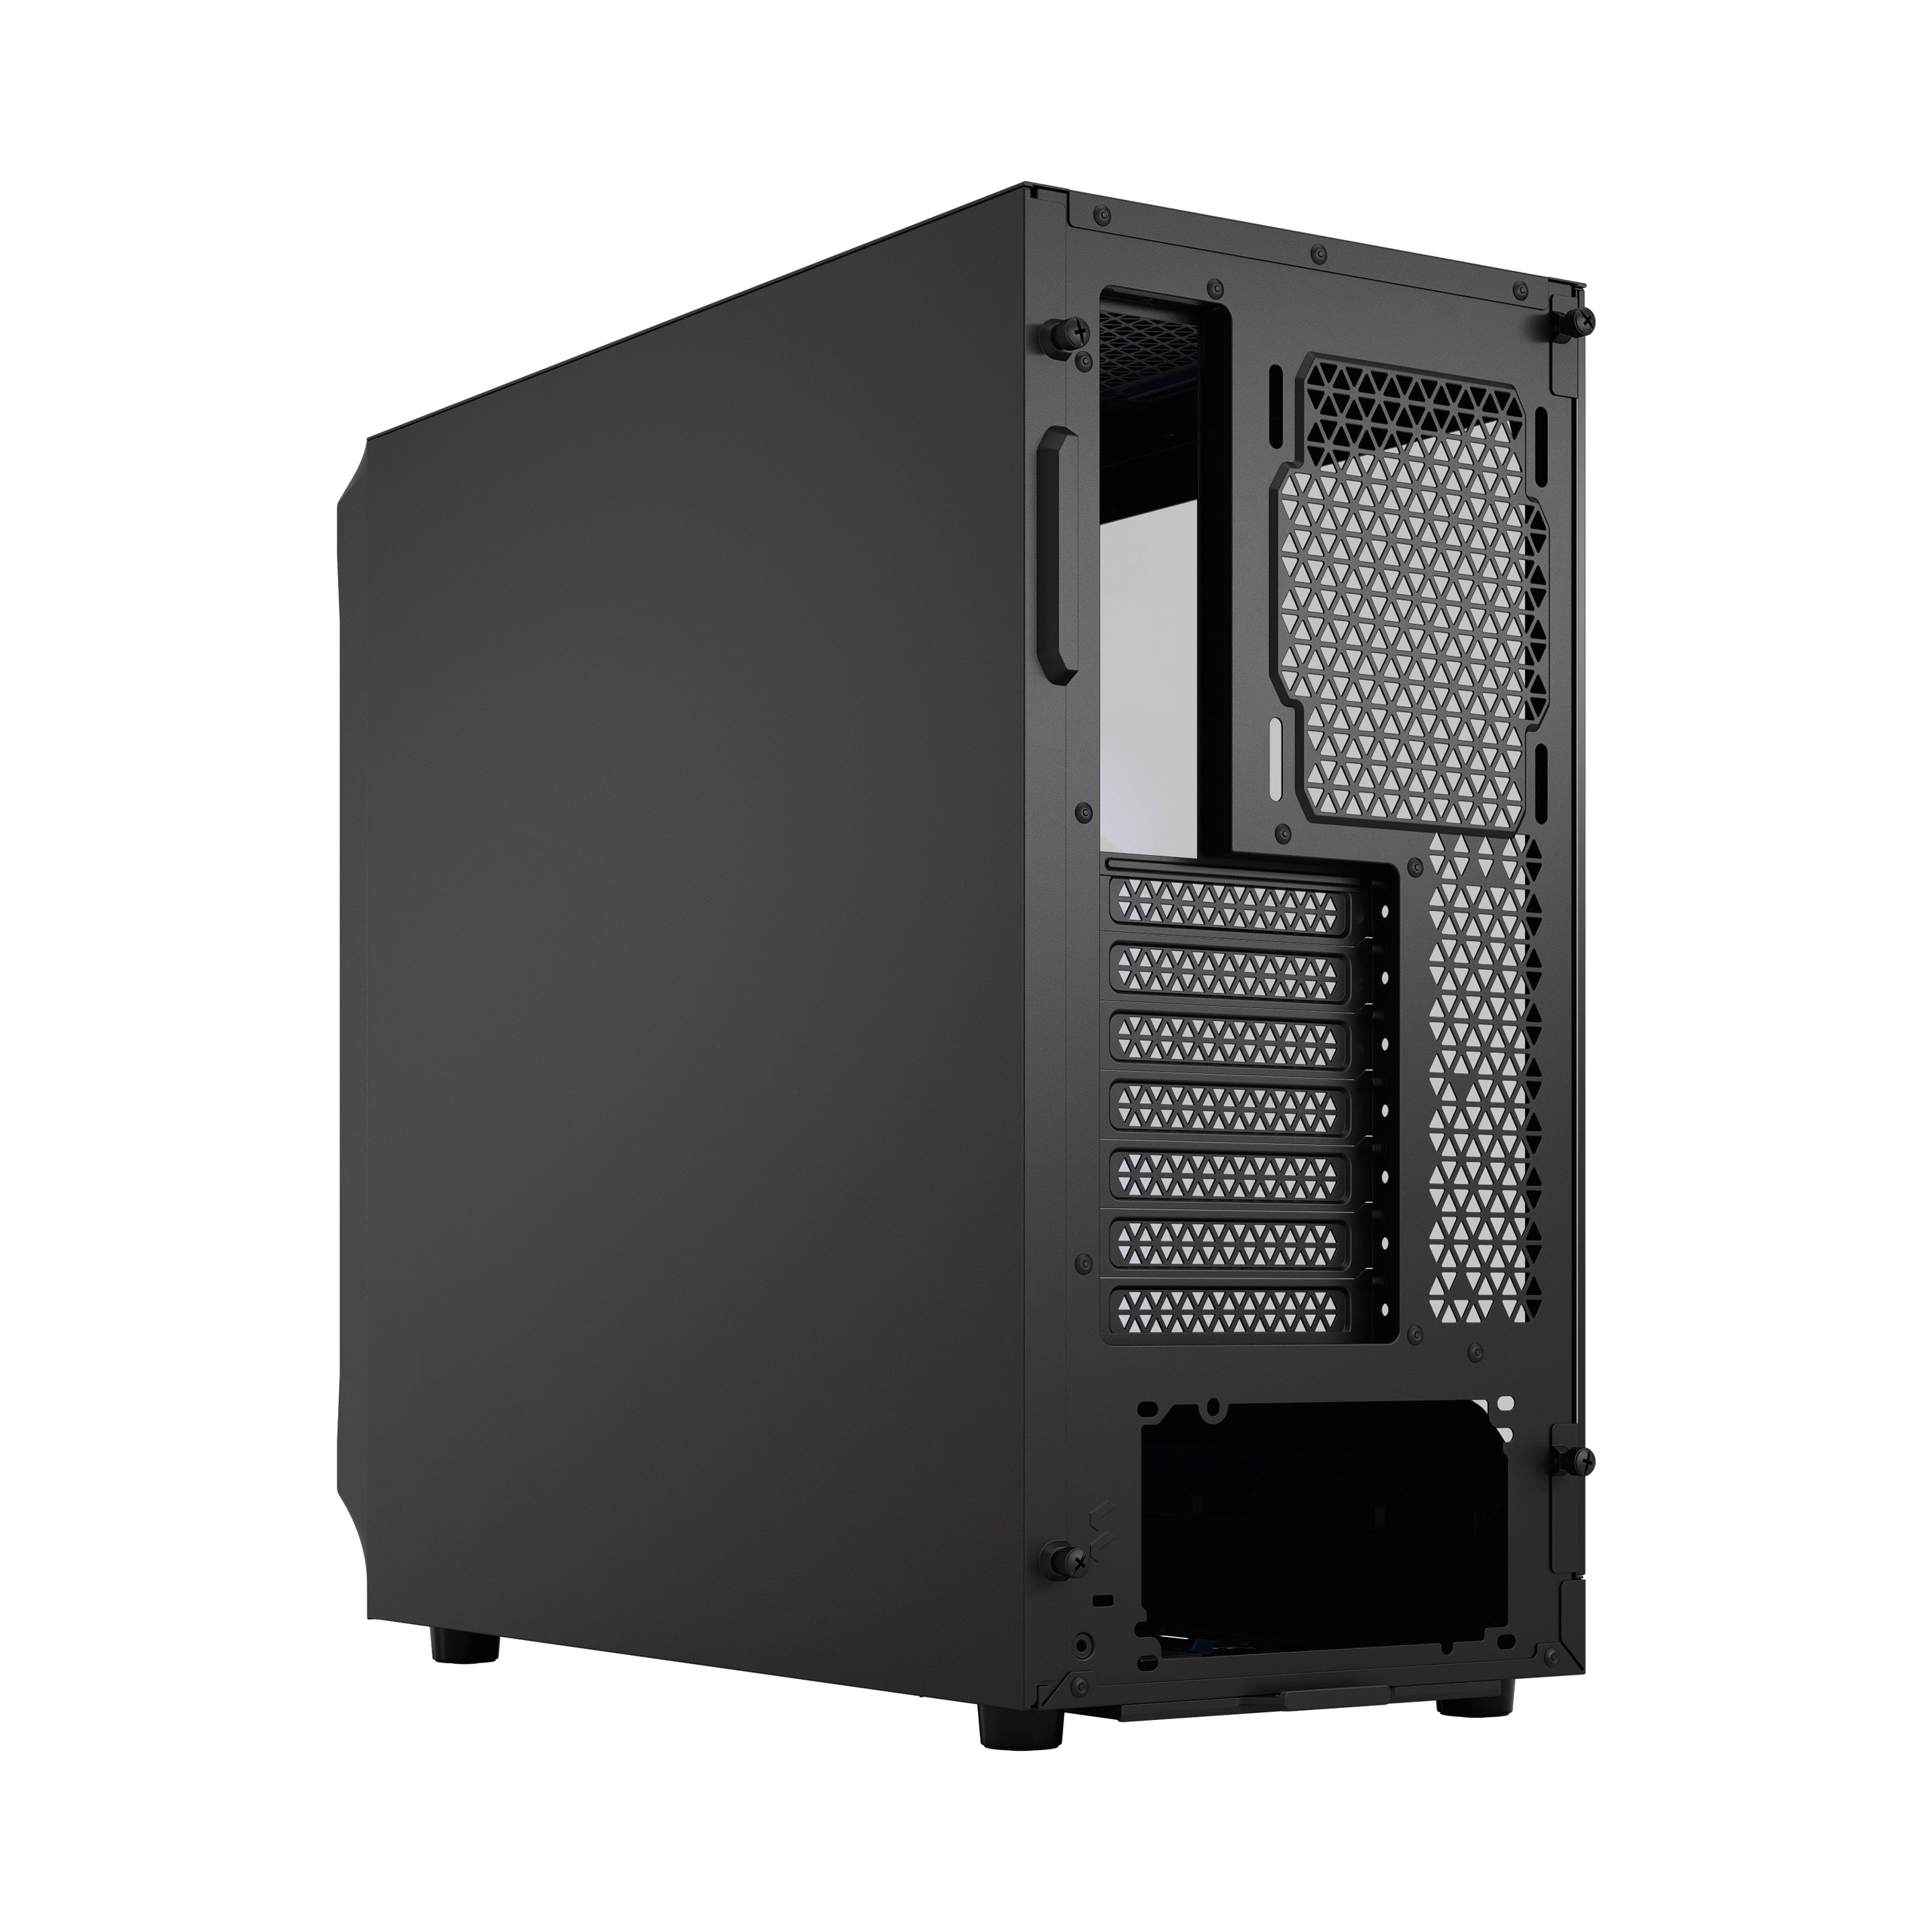 Fractal Design Launches Two New Cases At Computex